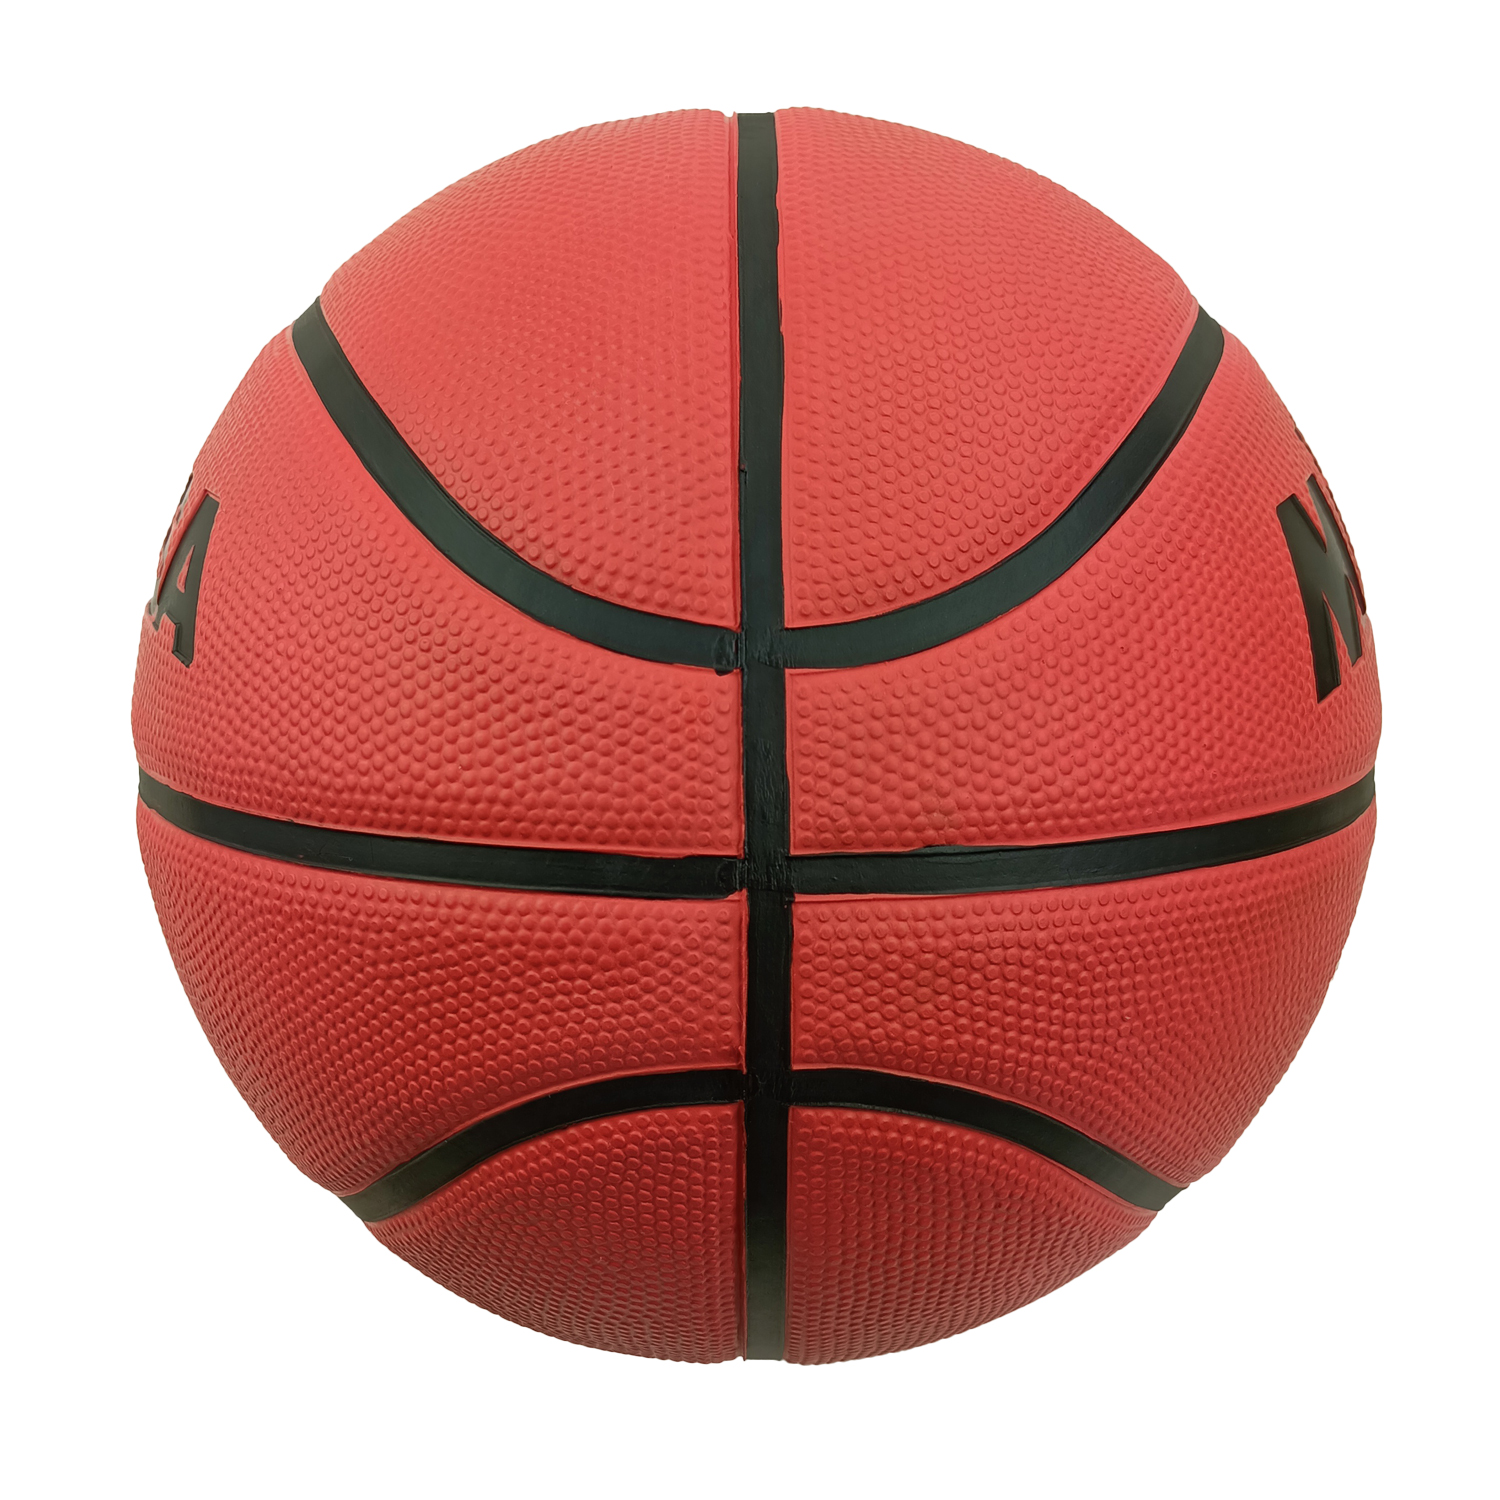 MIKASA BB734C-RBBK BASKETBALL SIZE 7 WITH QUALITY RUBBER (RED/BROWN), , large image number null